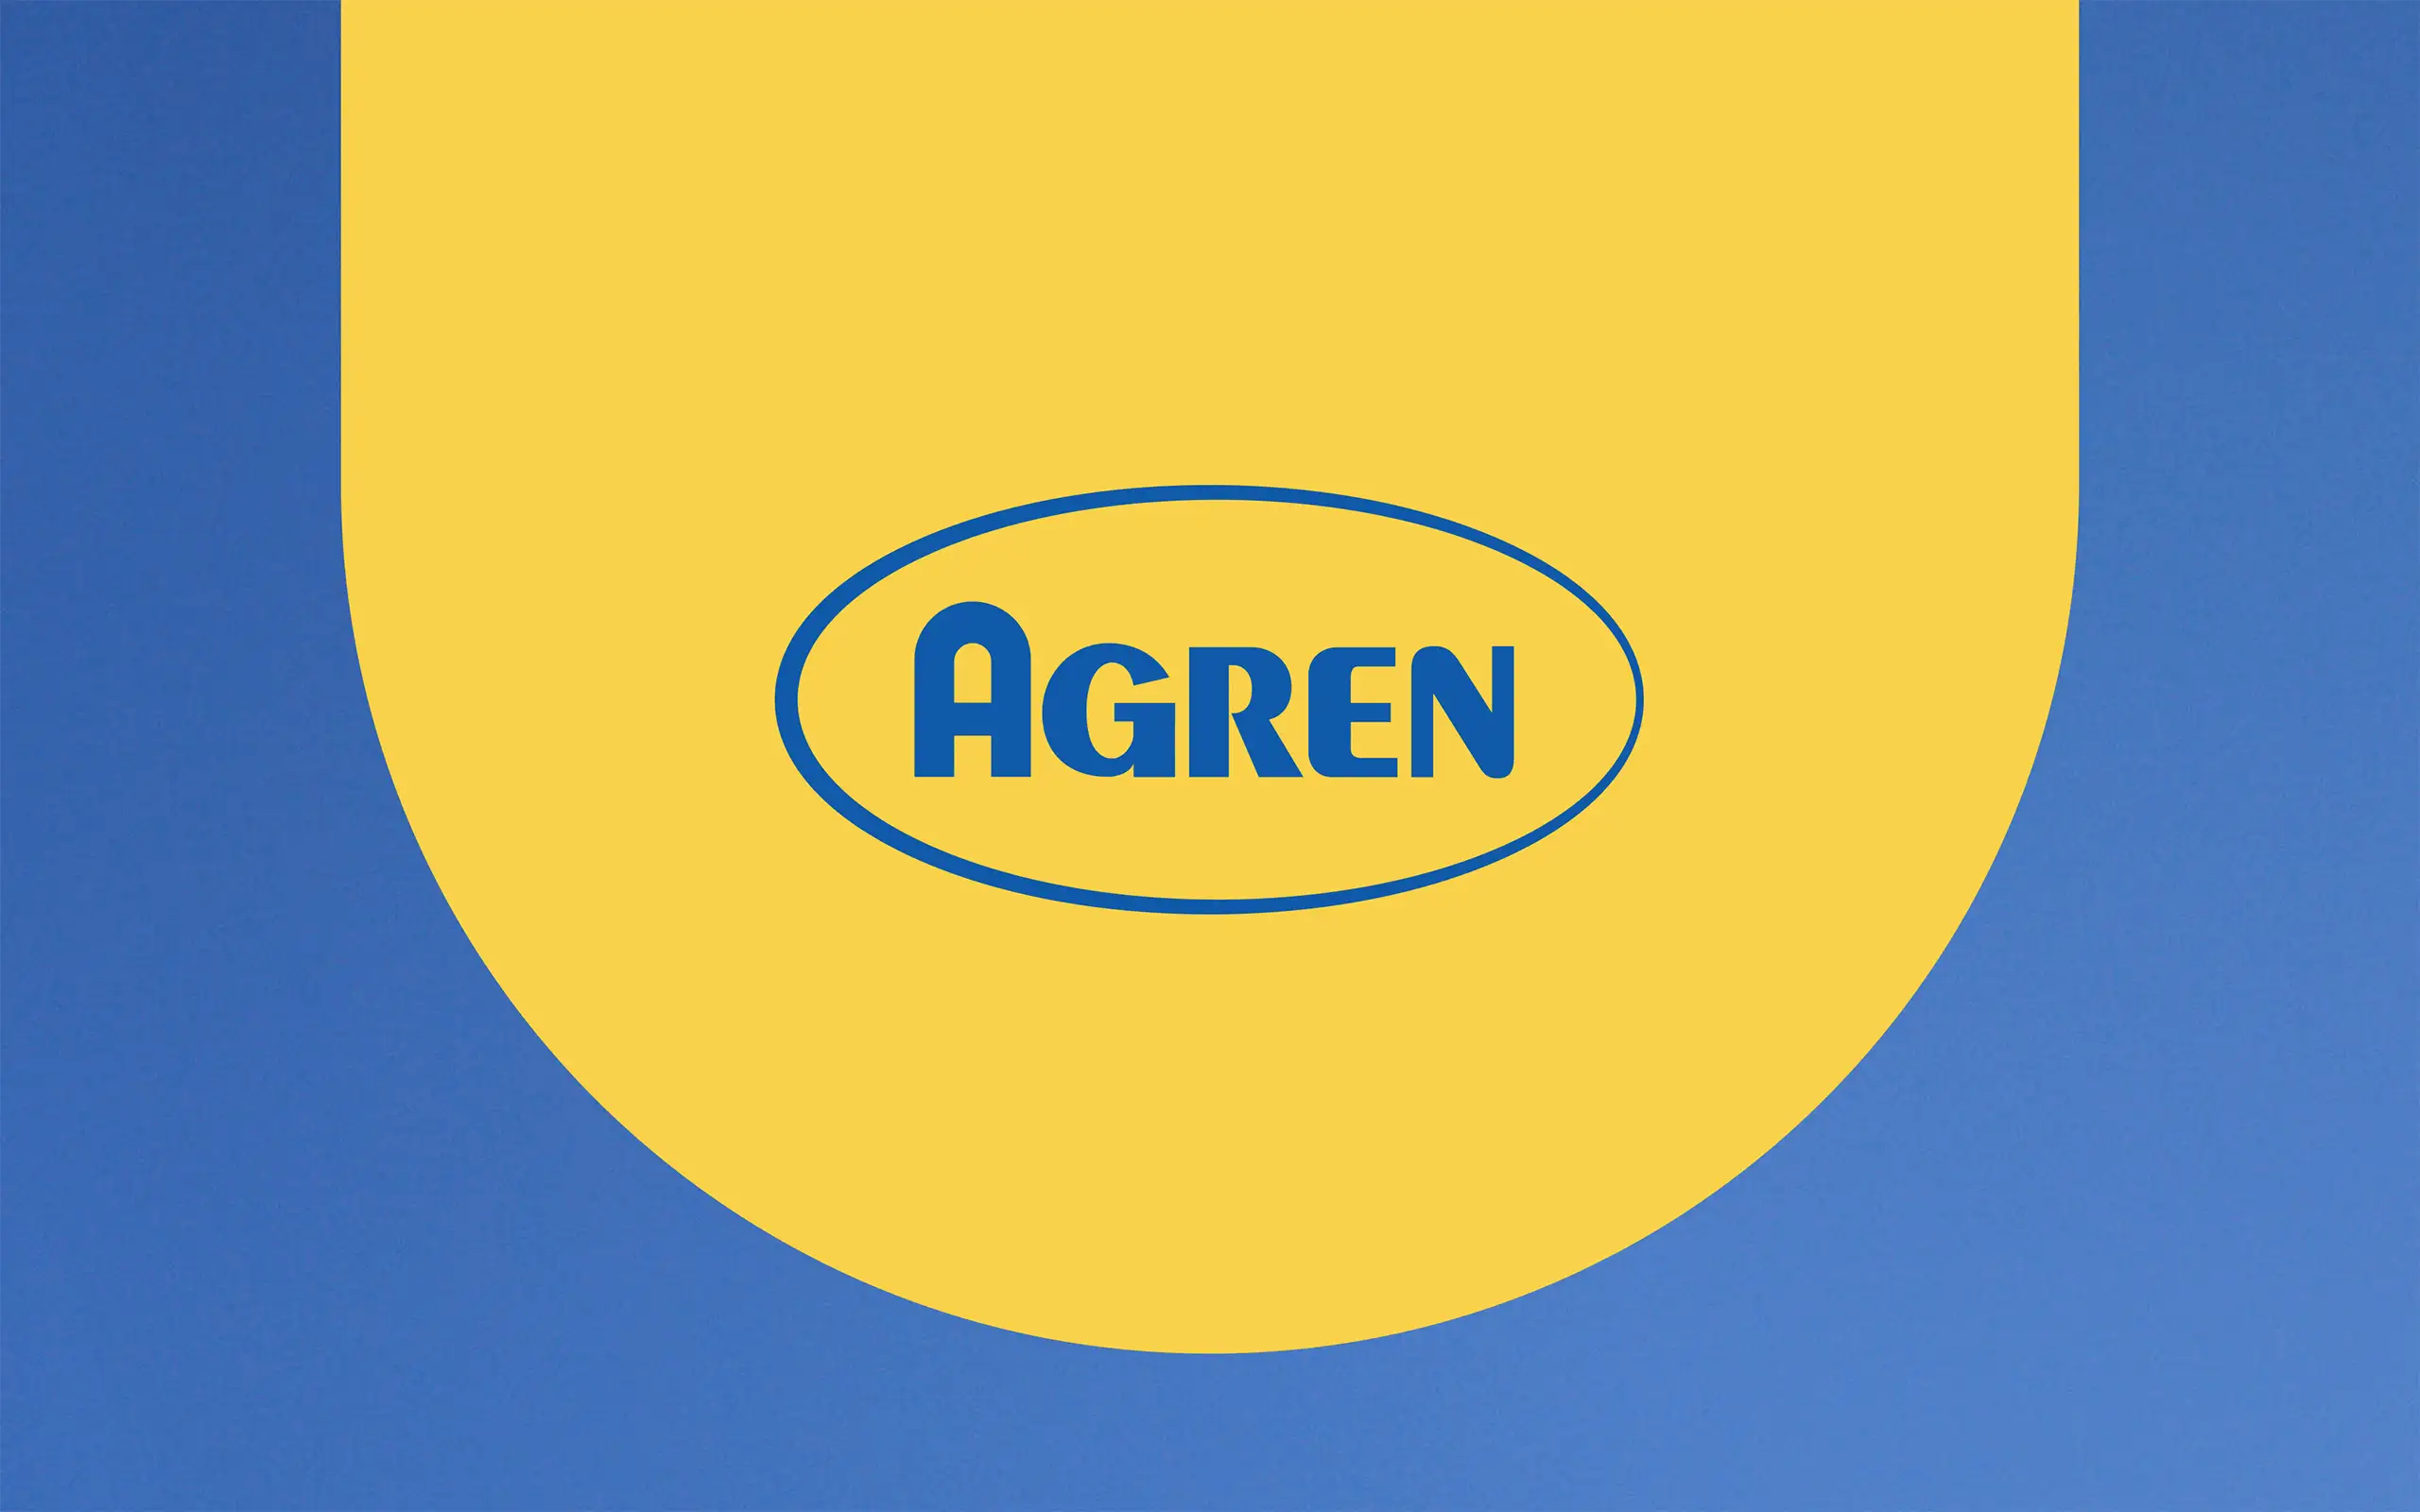 Agren logo on abstract background